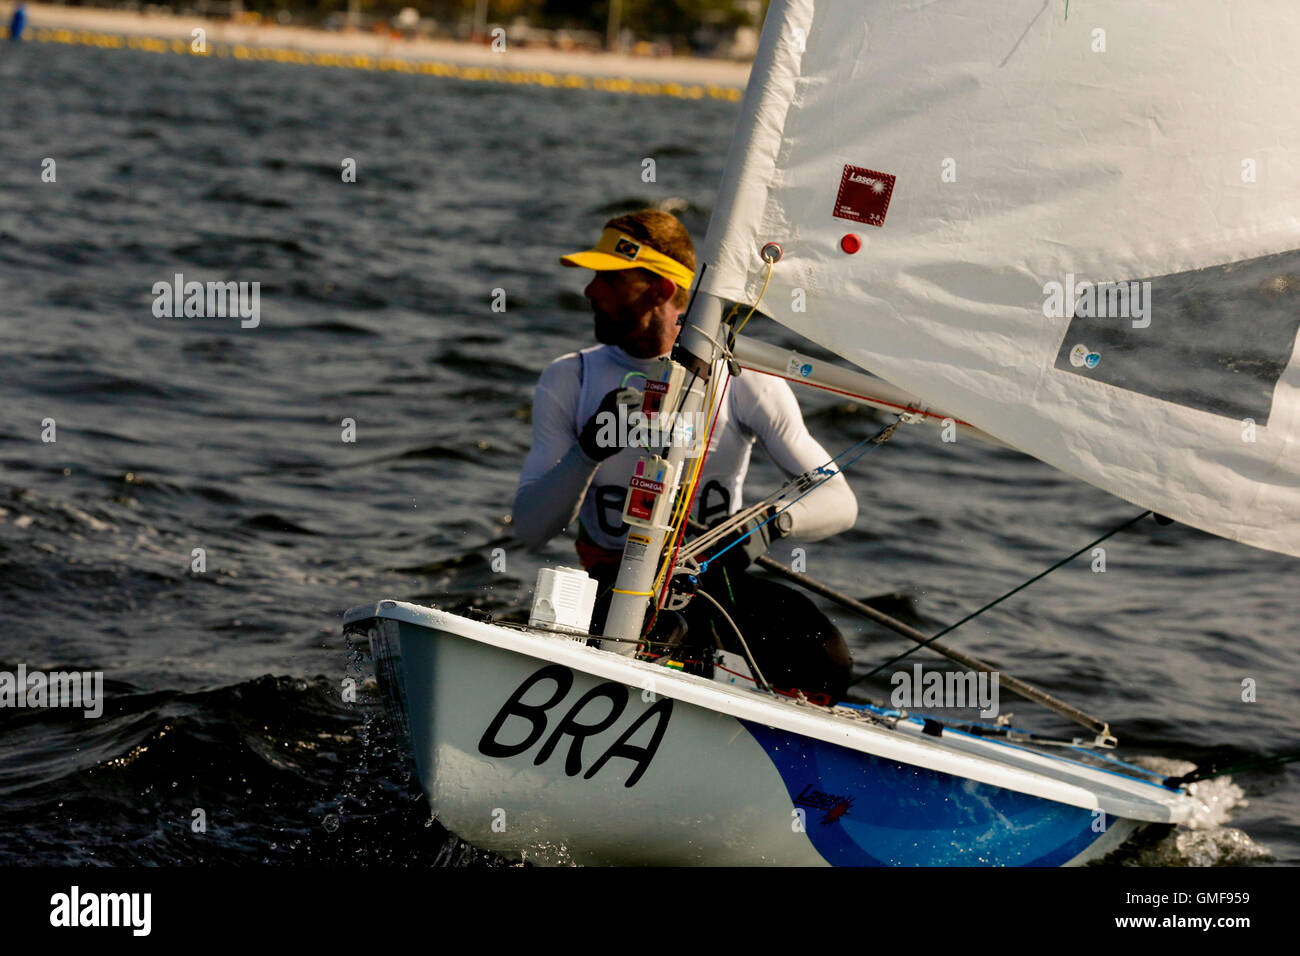 RIO DE JANEIRO, RJ - 16.08.2016: 2016 SAILING OLYMPICS - Robert Scheidt (BRA) during the candle Rio Olympics 2016 held at Marina da Glória, in Guanabara Bay. NOT AVAILABLE FOR LICENSING IN CHINA (Photo: Marcelo Cortes/Fotoarena) Stock Photo